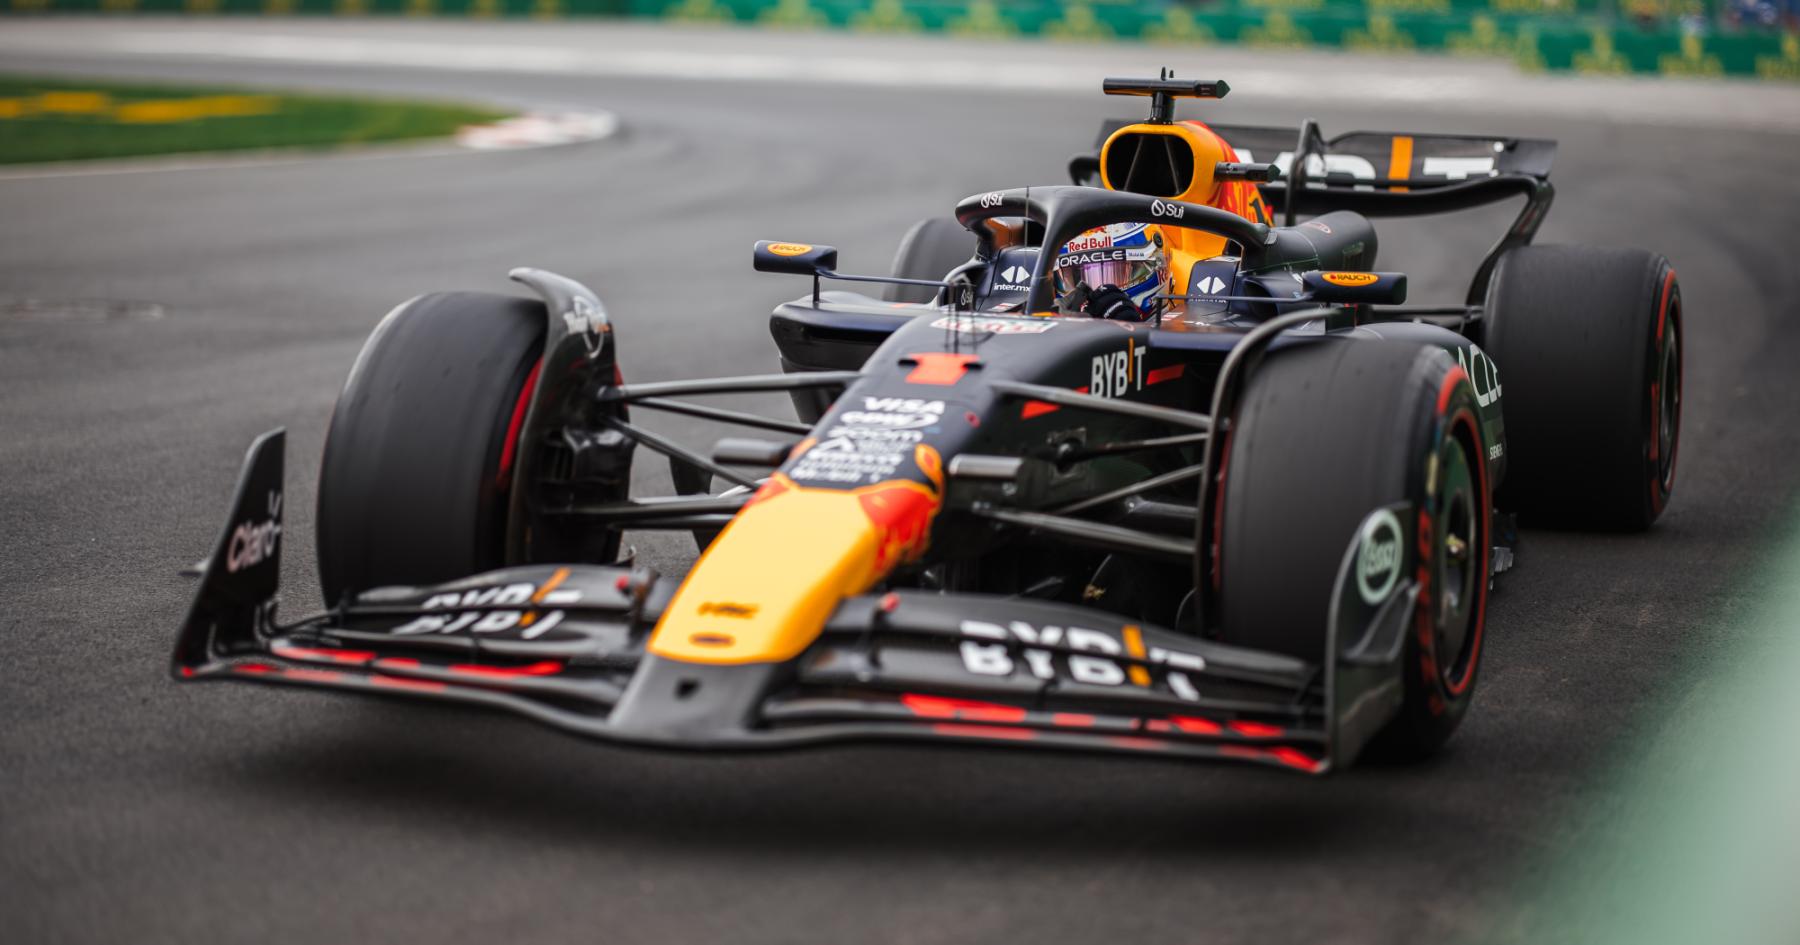 Verstappen's Demand for Excellence Shines Through in Canadian GP Showdown